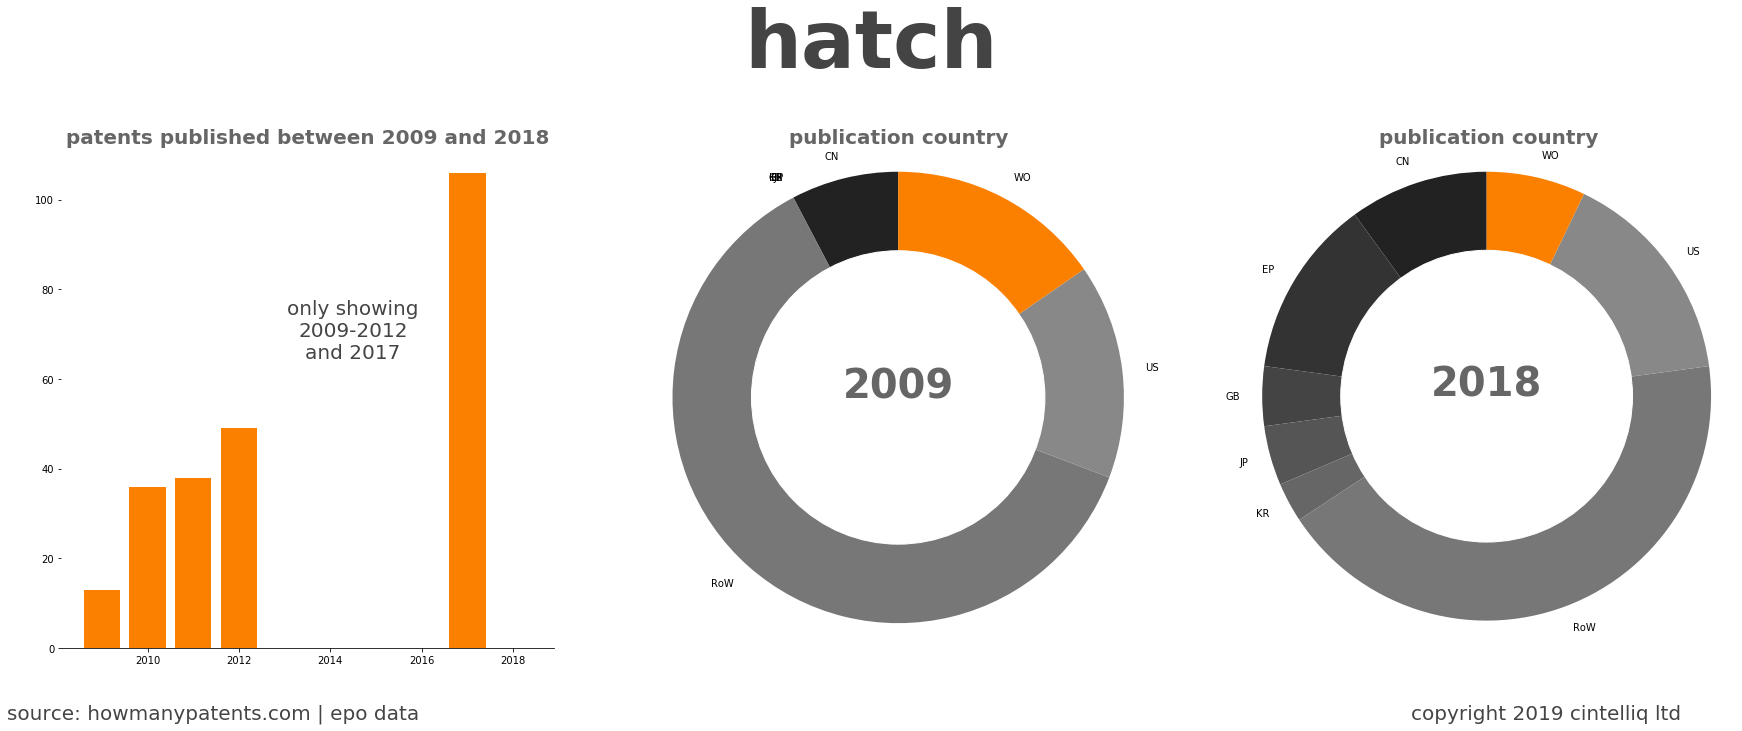 summary of patents for Hatch